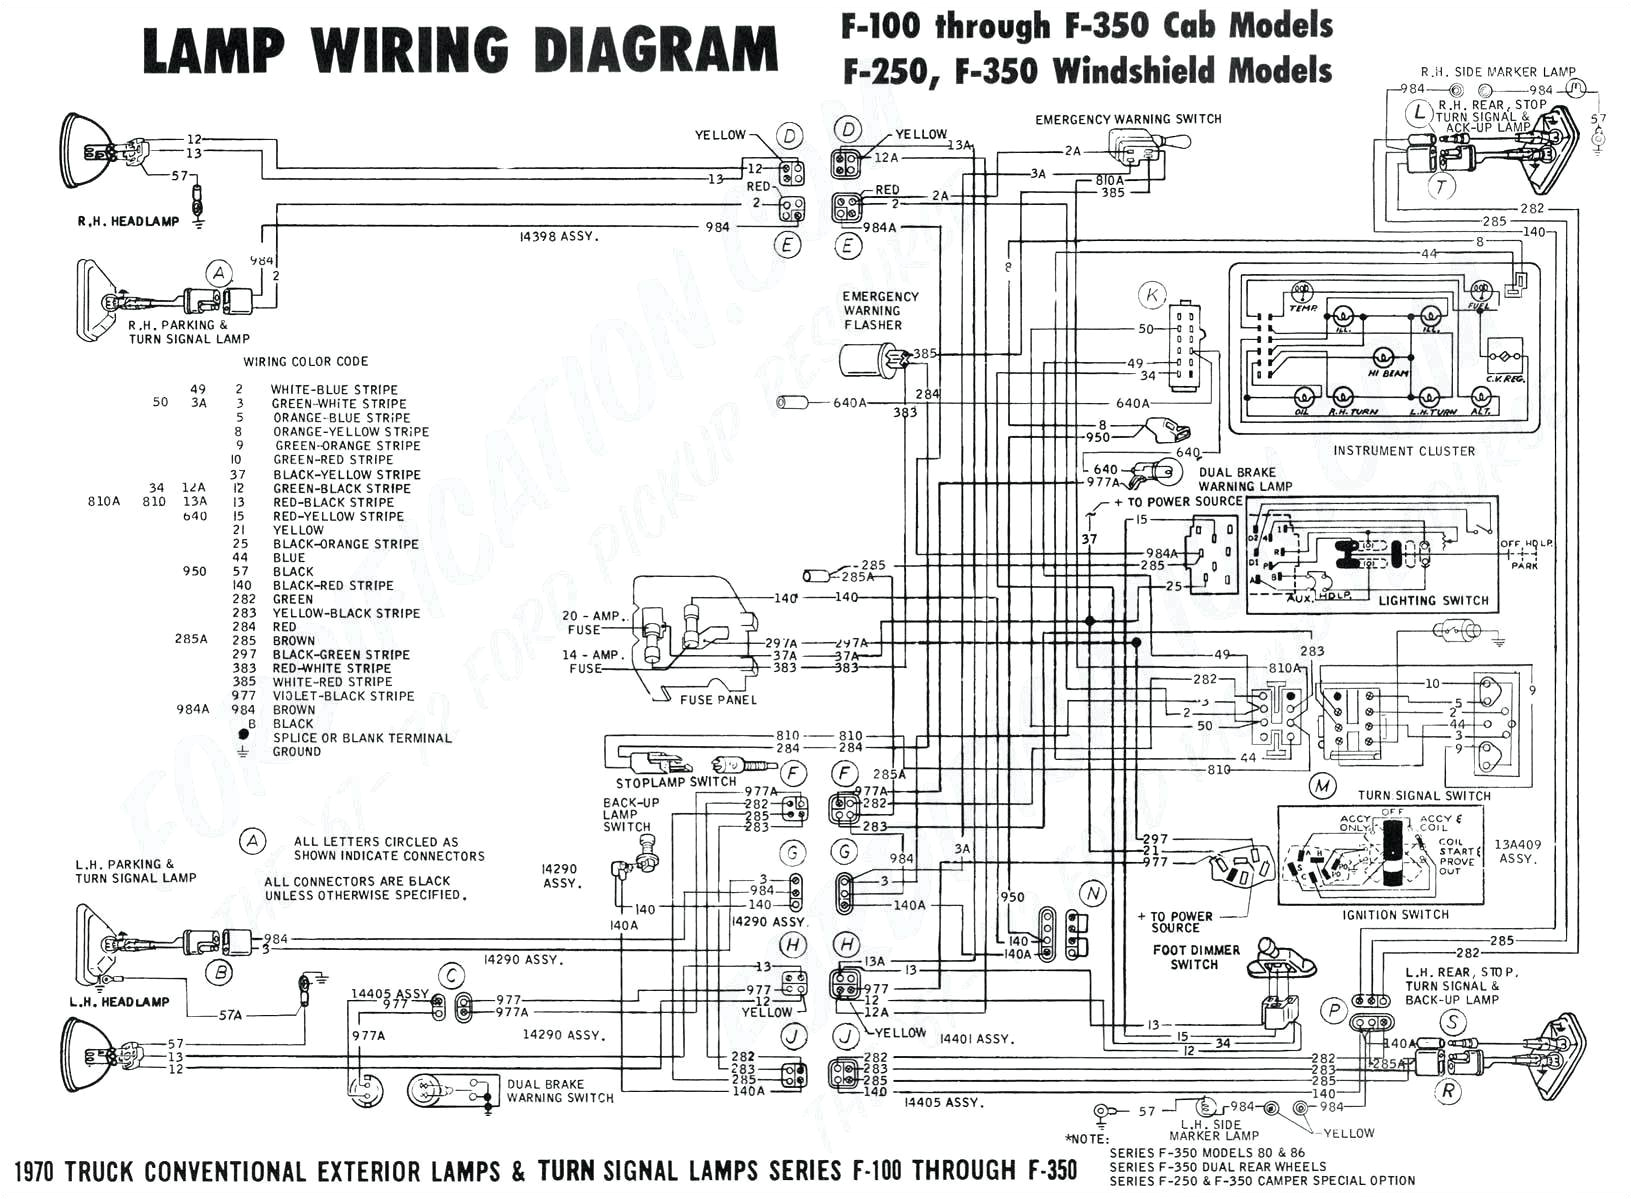 1965 mustang wiring diagram lovely 1965 ford mustang fuse box diagram wiring schematic enthusiast jpg